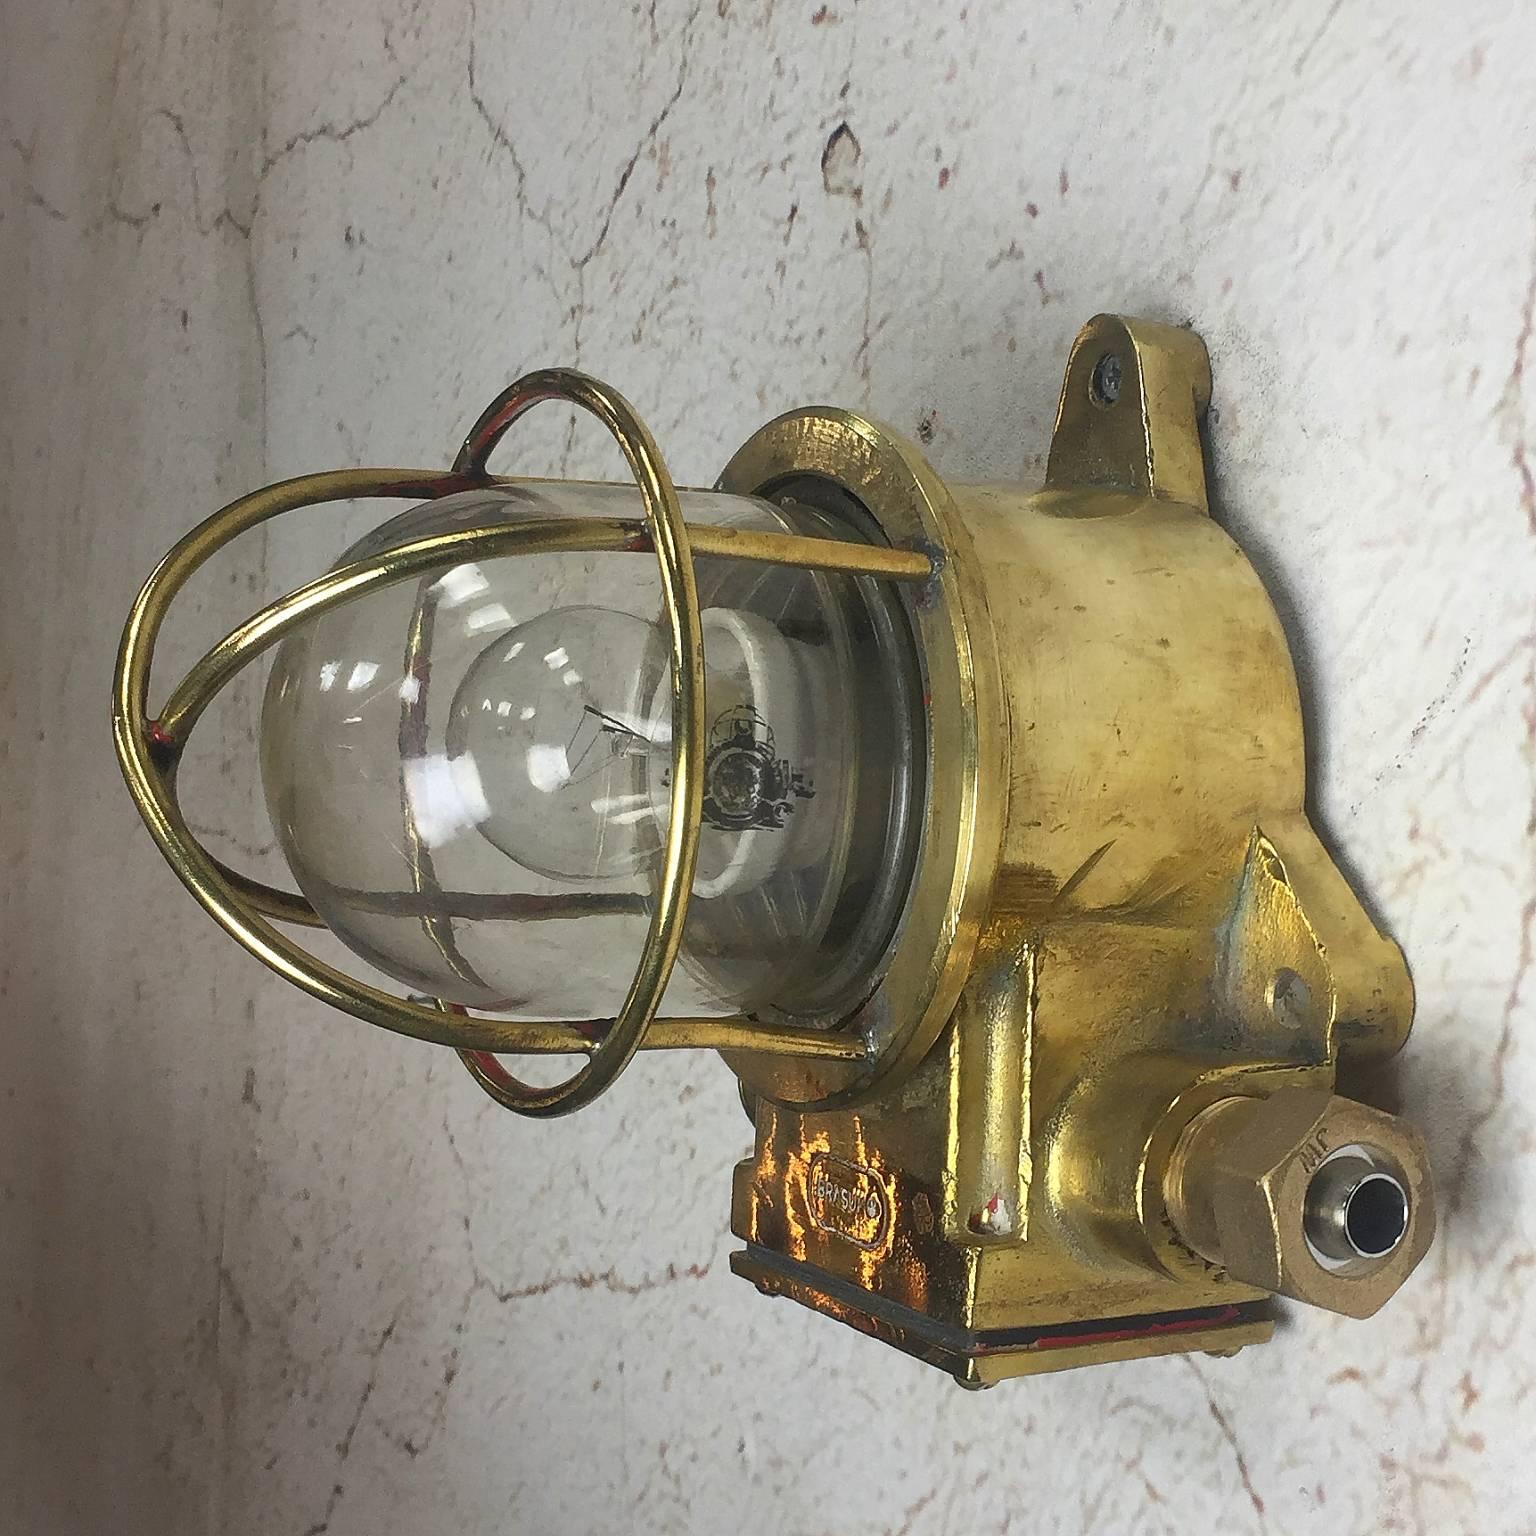 Late 20th Century British Made Brass Wall Light, Cage and Glass Dome - Marine 4